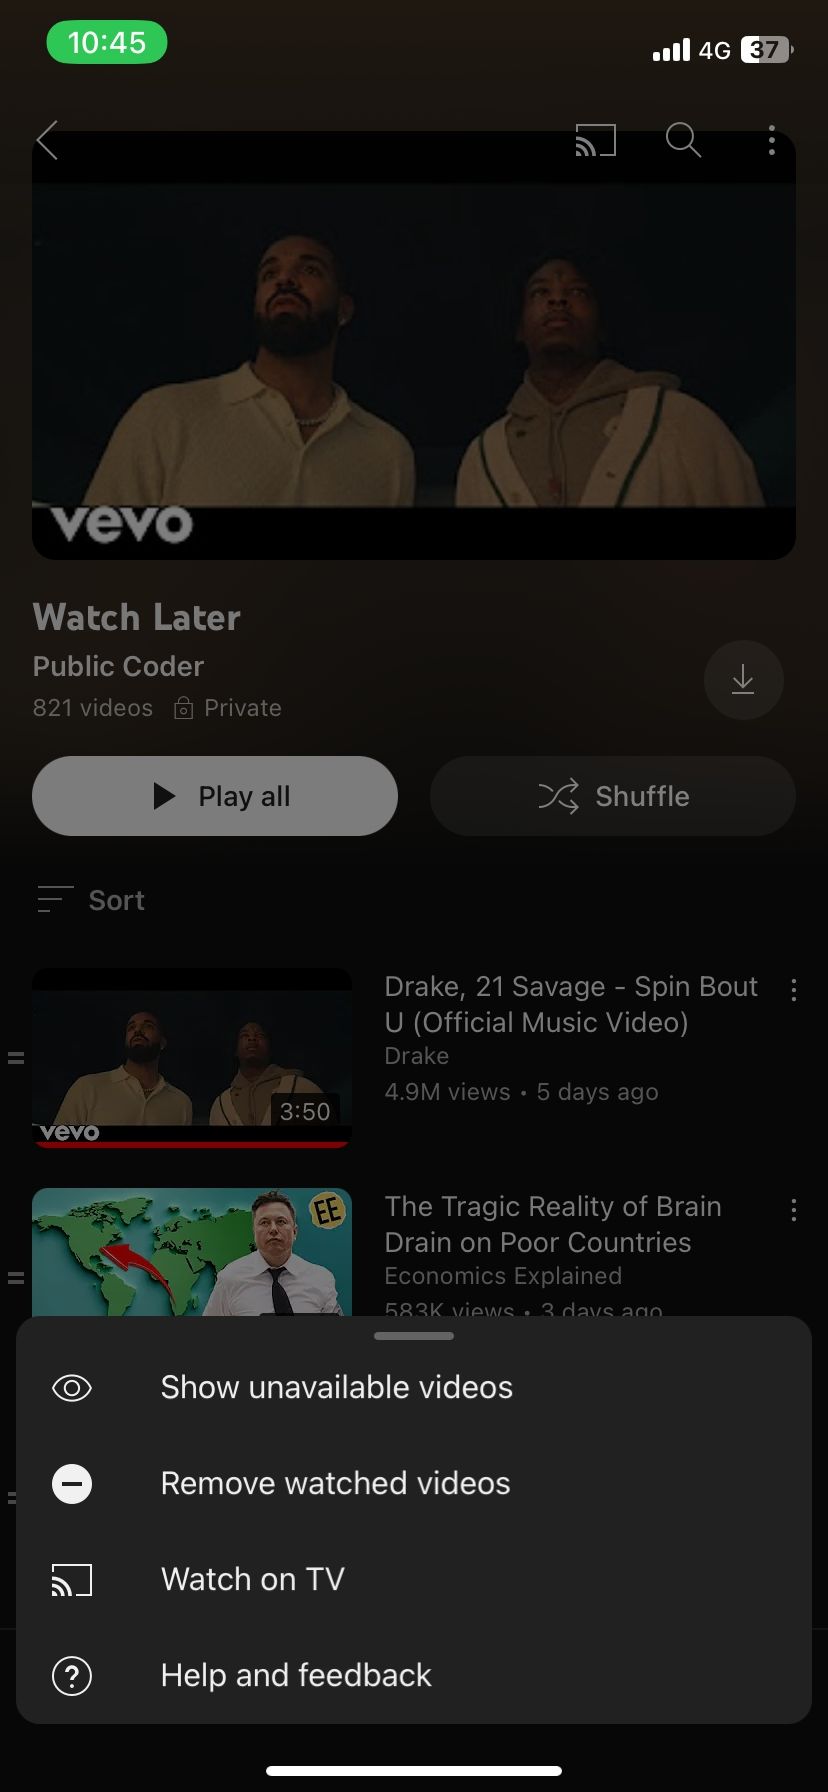 Removing watched videos from Watch Later on YouTube